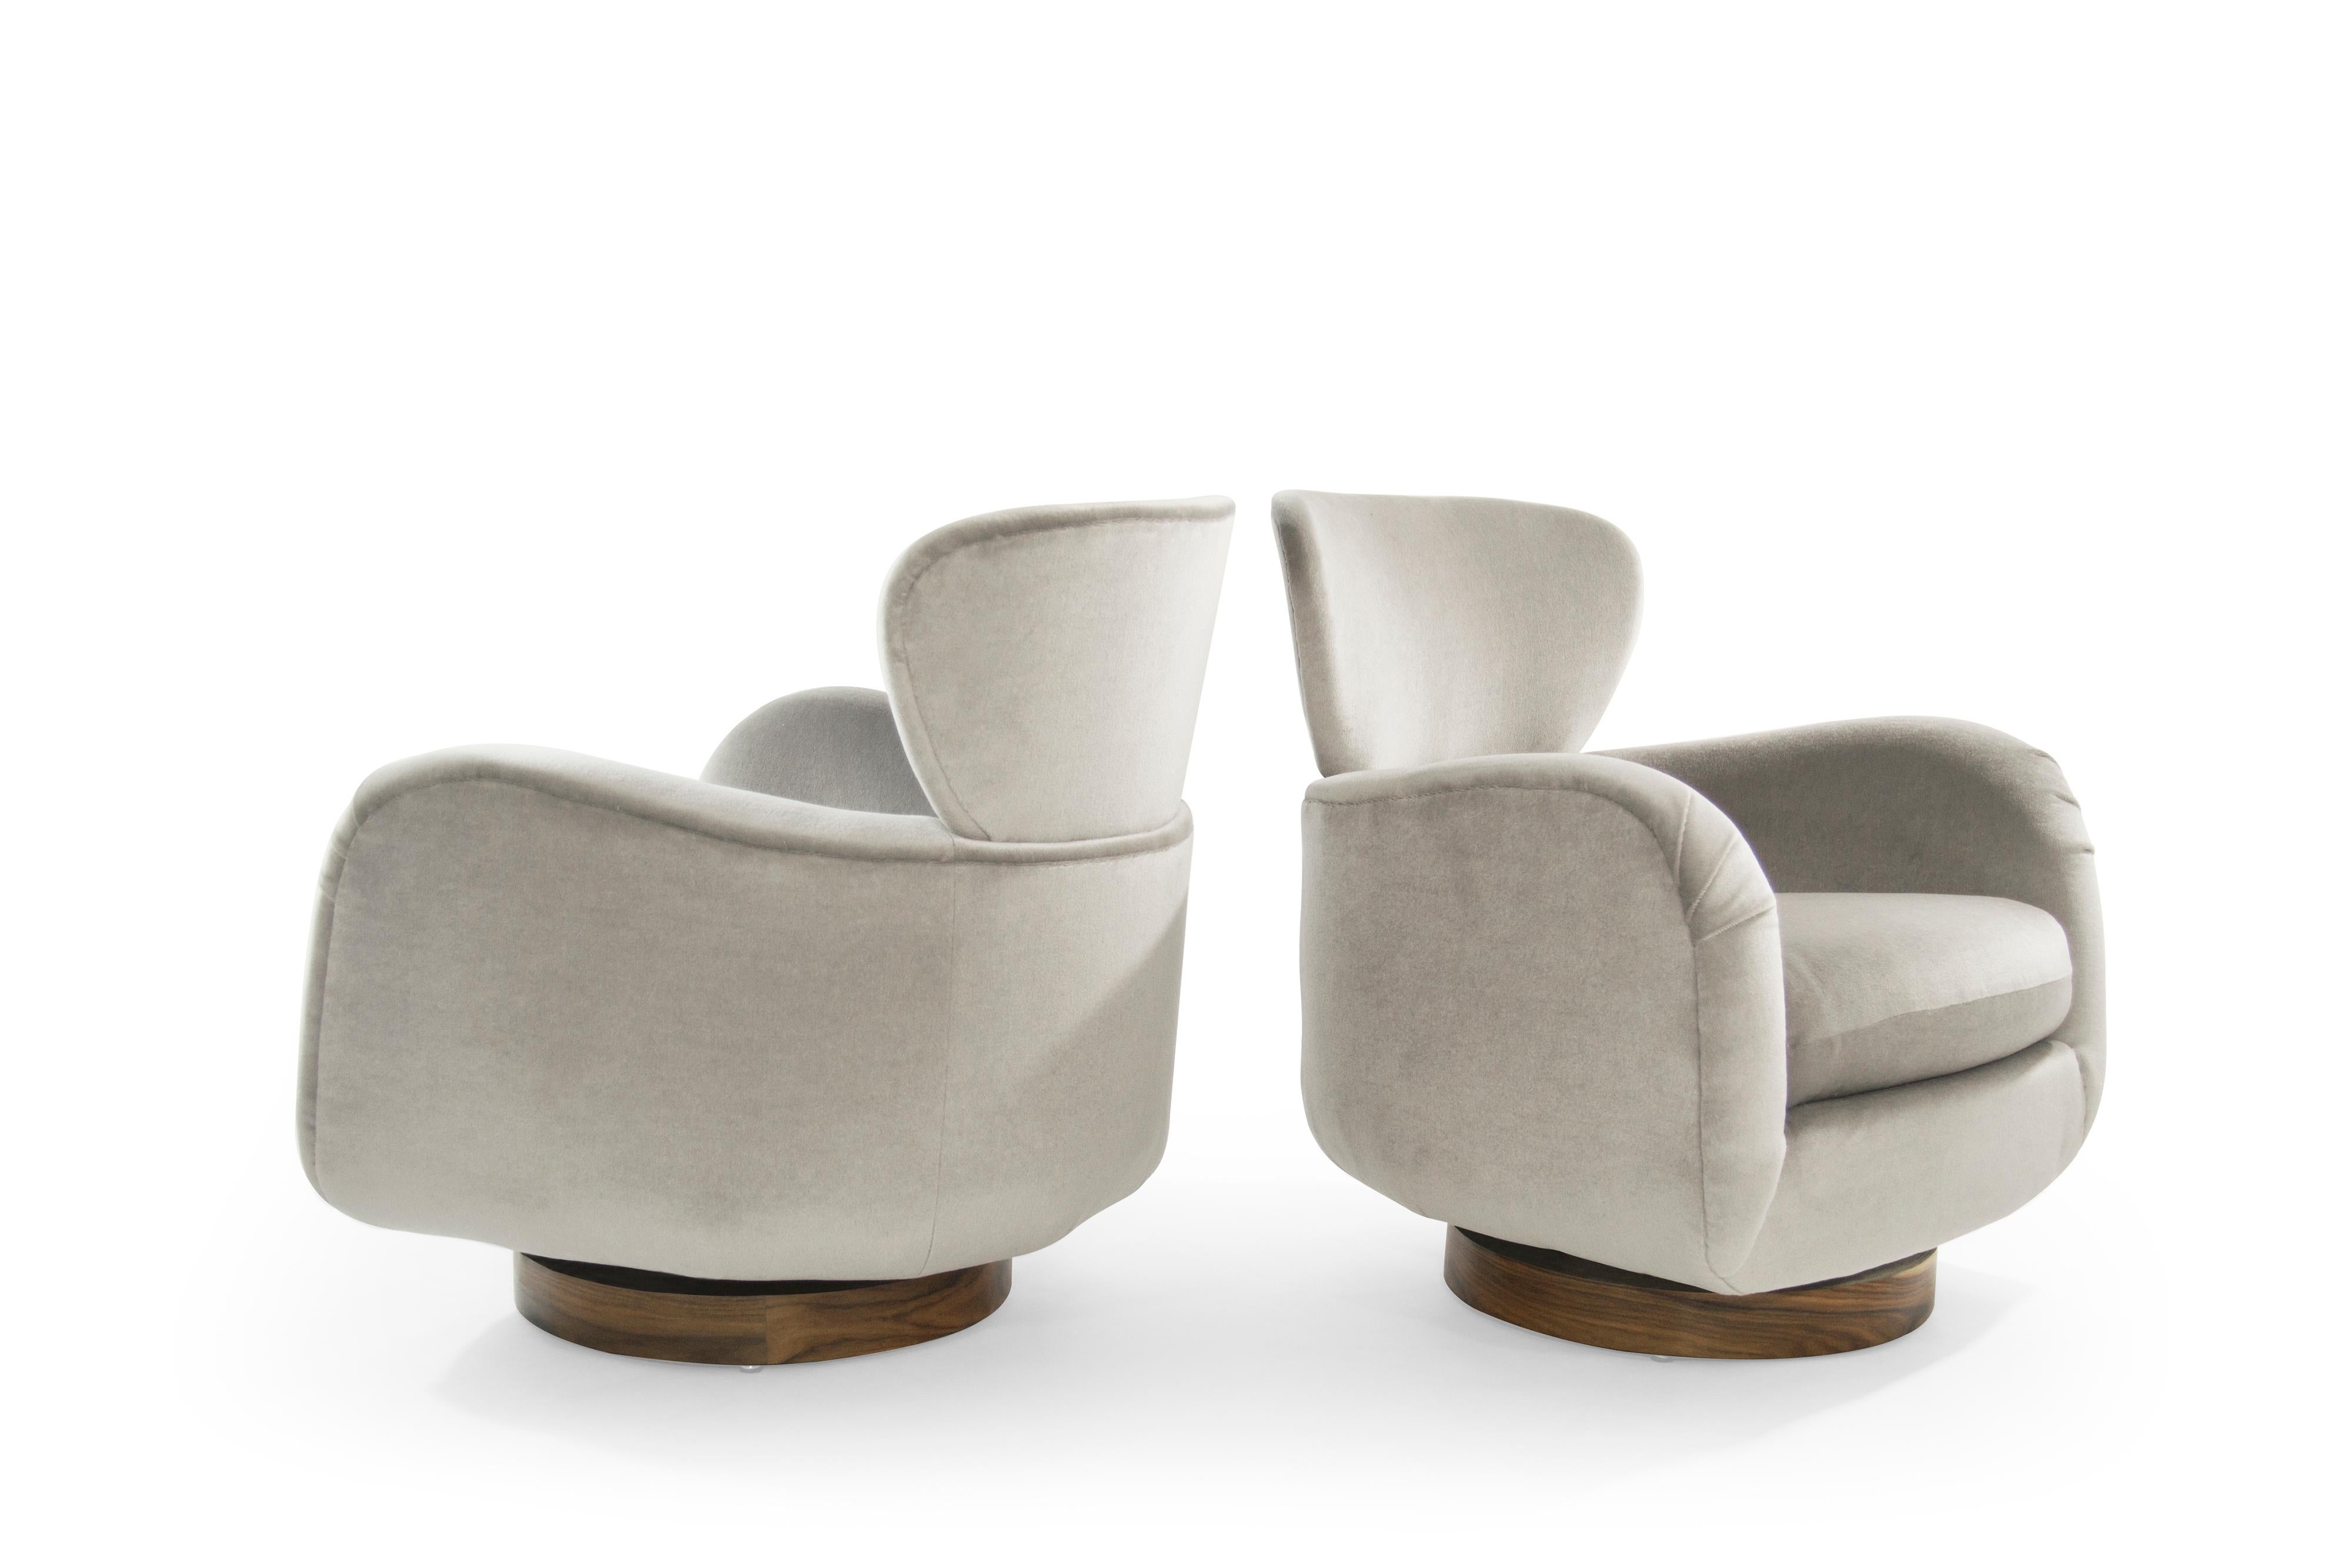 Important set of Vladimir Kagan for Directional pair of stylized wingback lounge chairs and ottoman. Sumptuously designed with enveloping curves and a large horned neck. Newly upholstered in Great Plains 